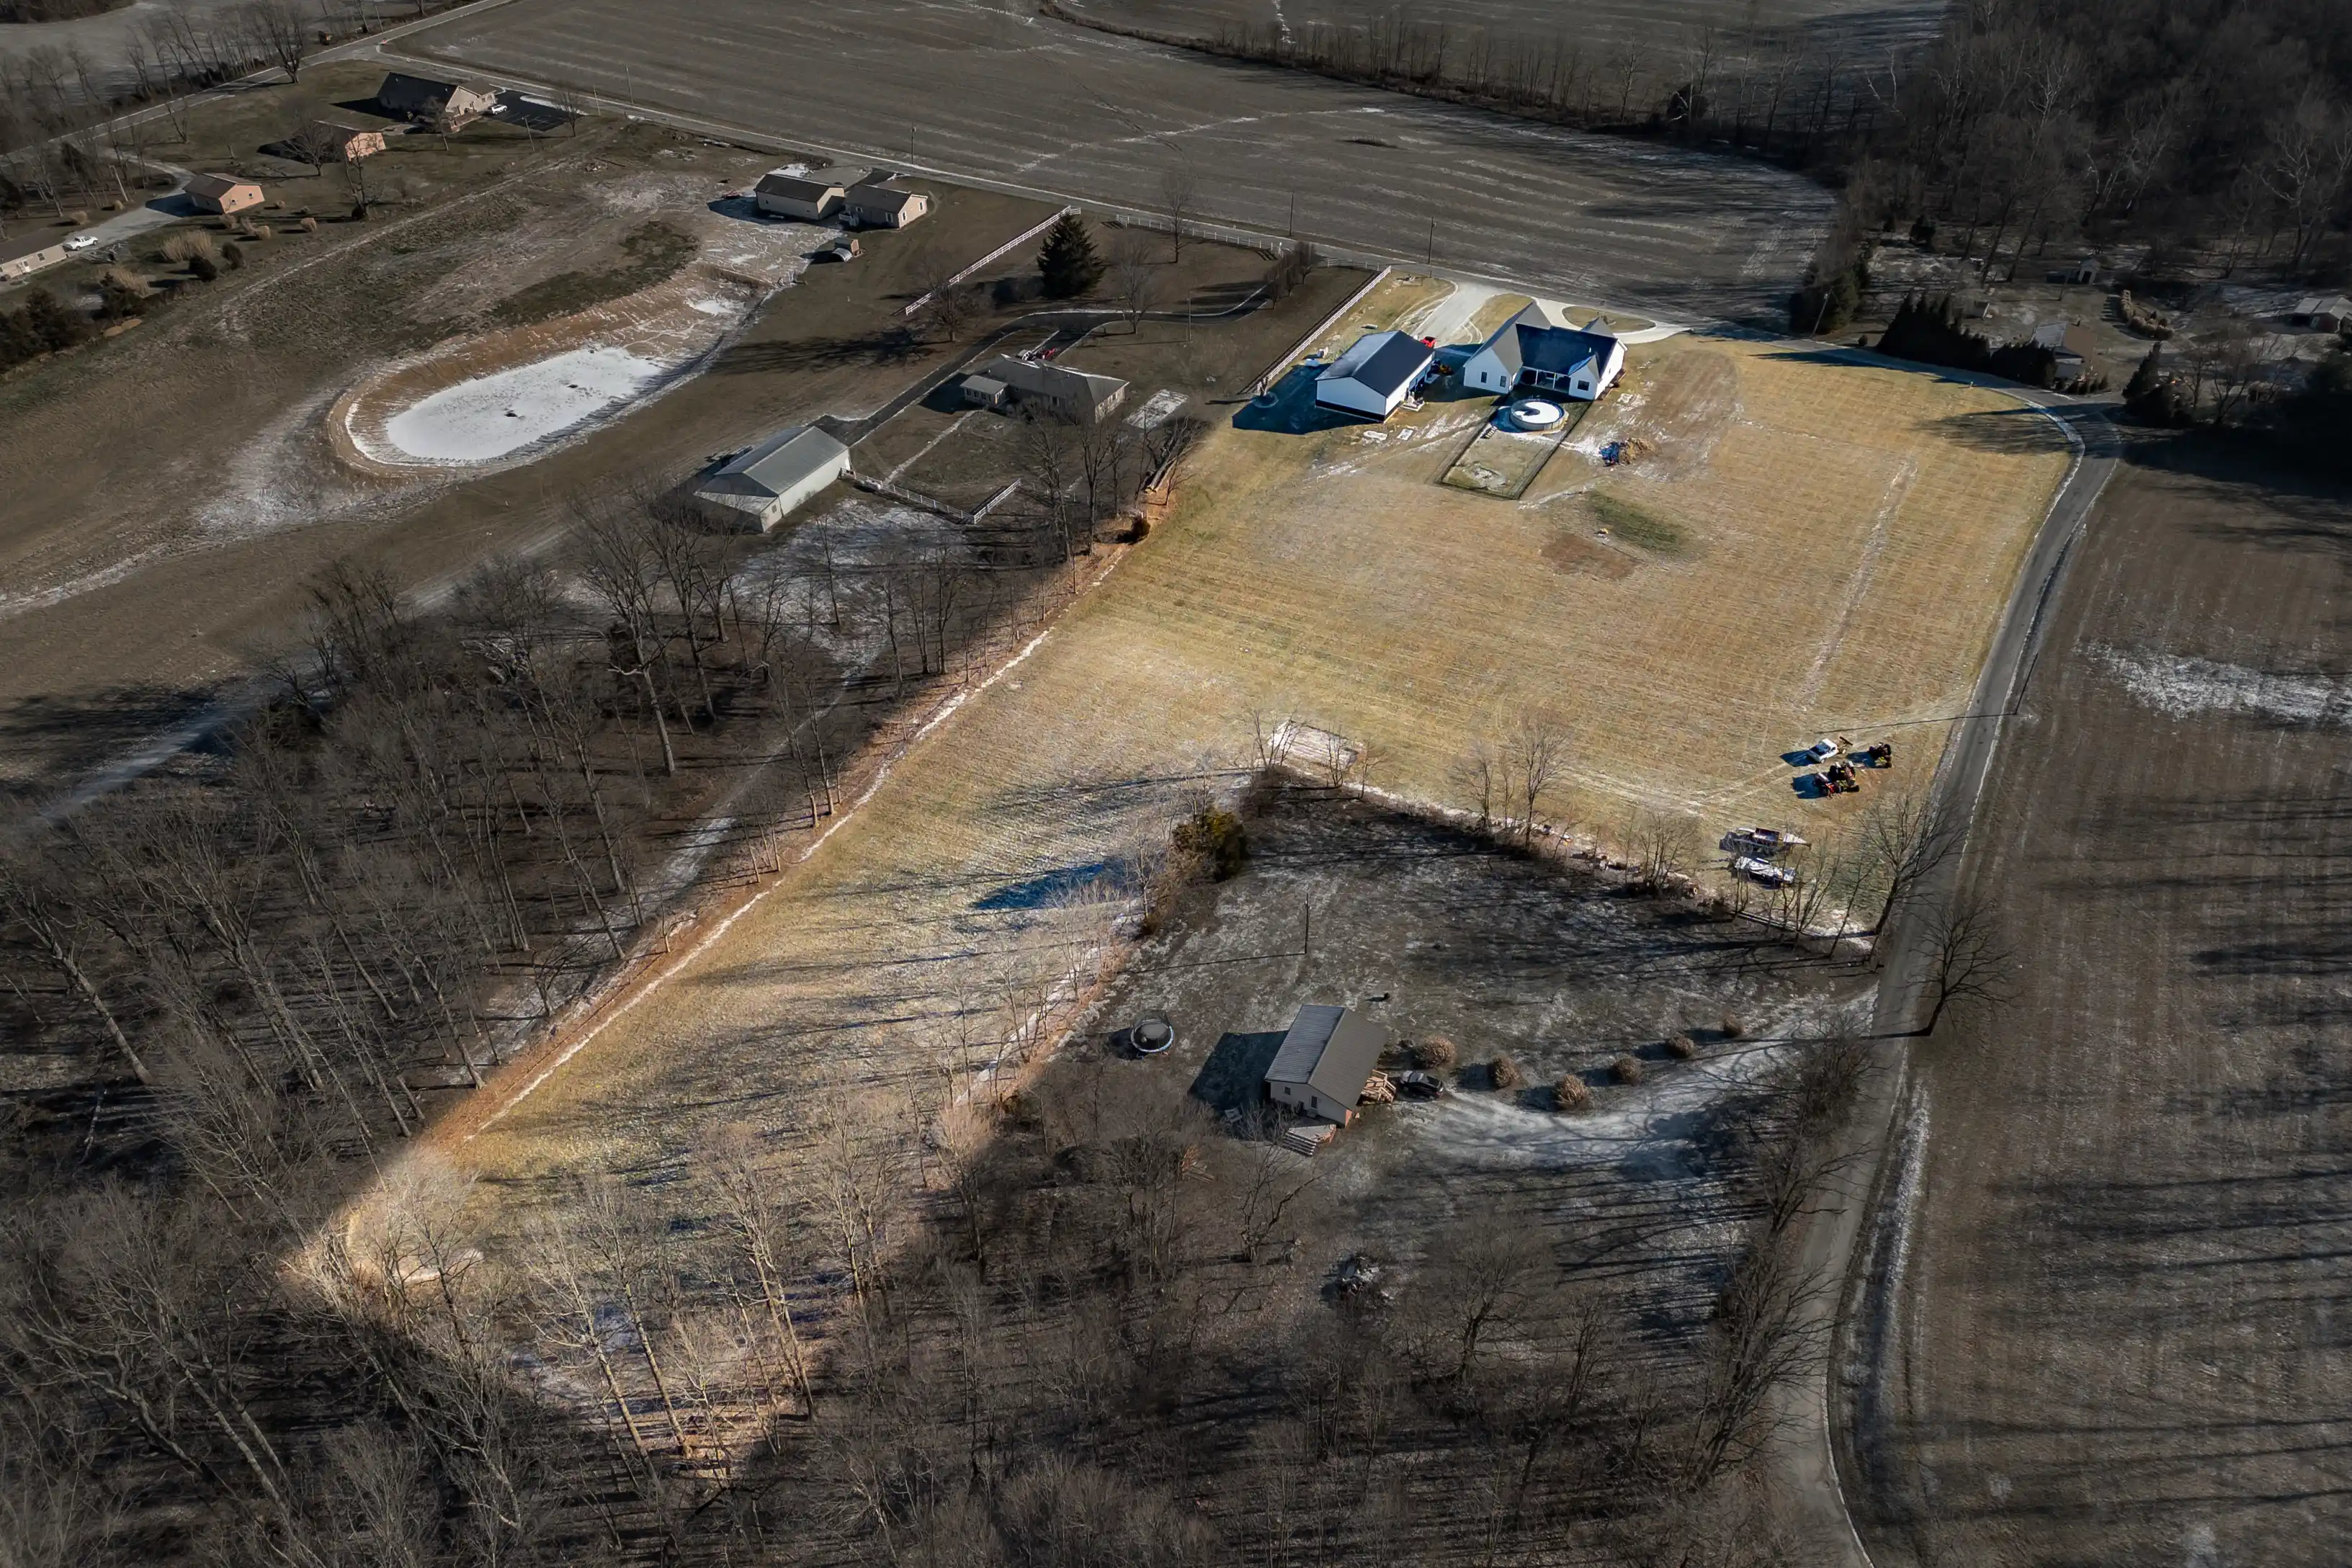 Aerial view of a rural landscape with a house, outbuildings, and bare trees during winter.